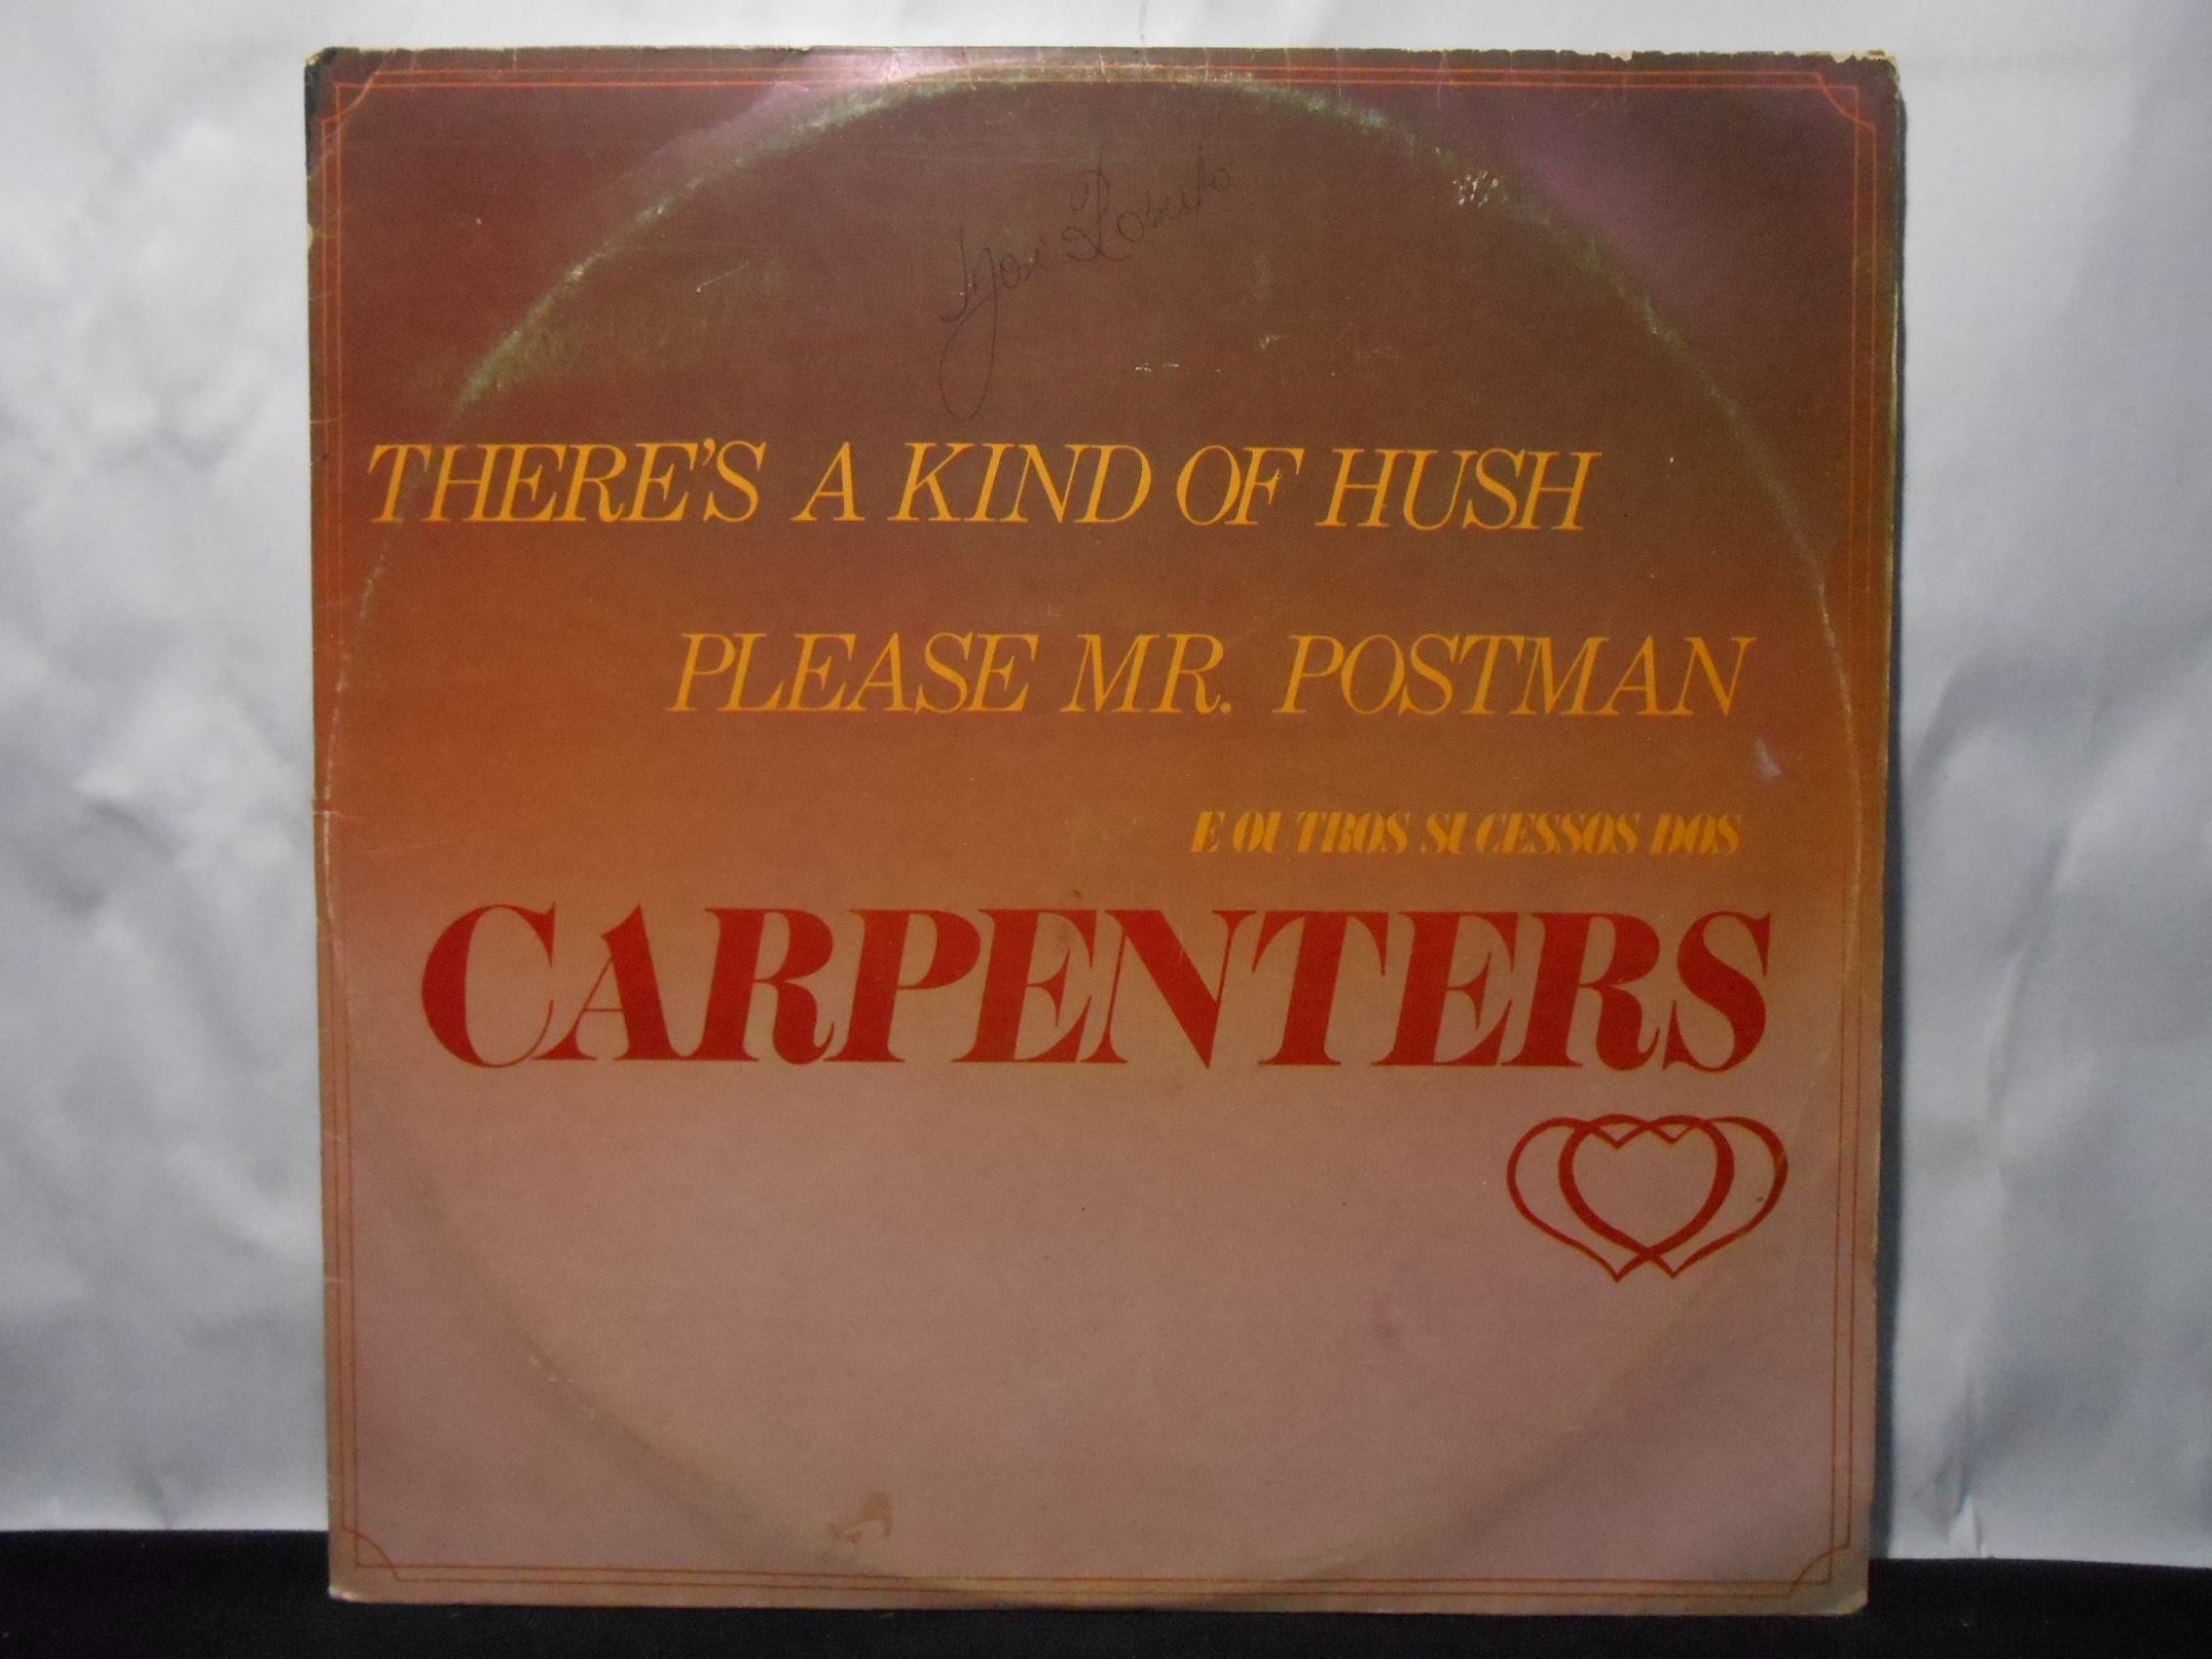 Vinil - Carpenters - Theres a Kind of Hush / Please Mr Postman e Outros Sucessos dos Carpenters